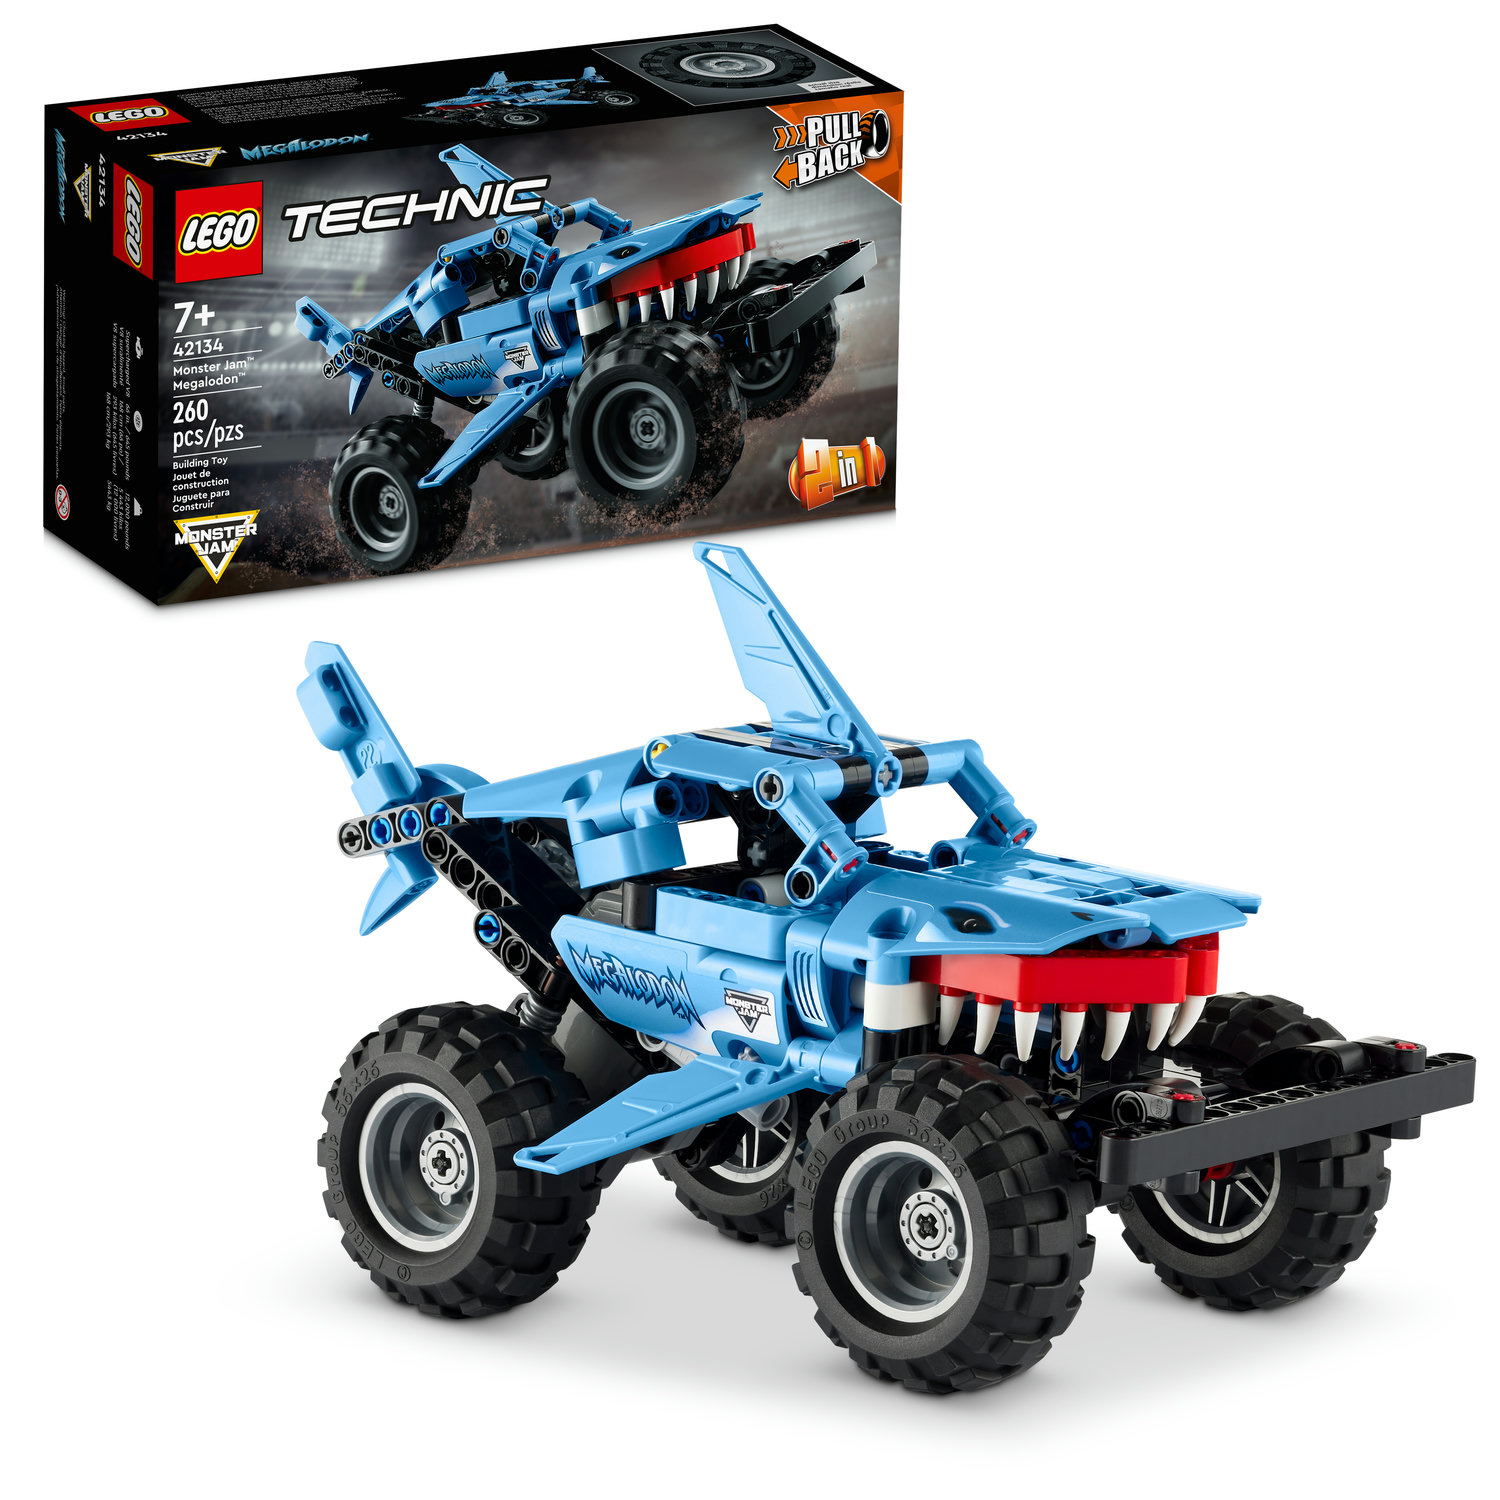 LEGO Technic Monster Jam Megalodon 42134 2 in 1 Pull Back Shark Truck to Lusca Low Racer Car Toy, 2022 Series, Set for Kids, Boys and Girls 7 Plus Years Old - image 1 of 10